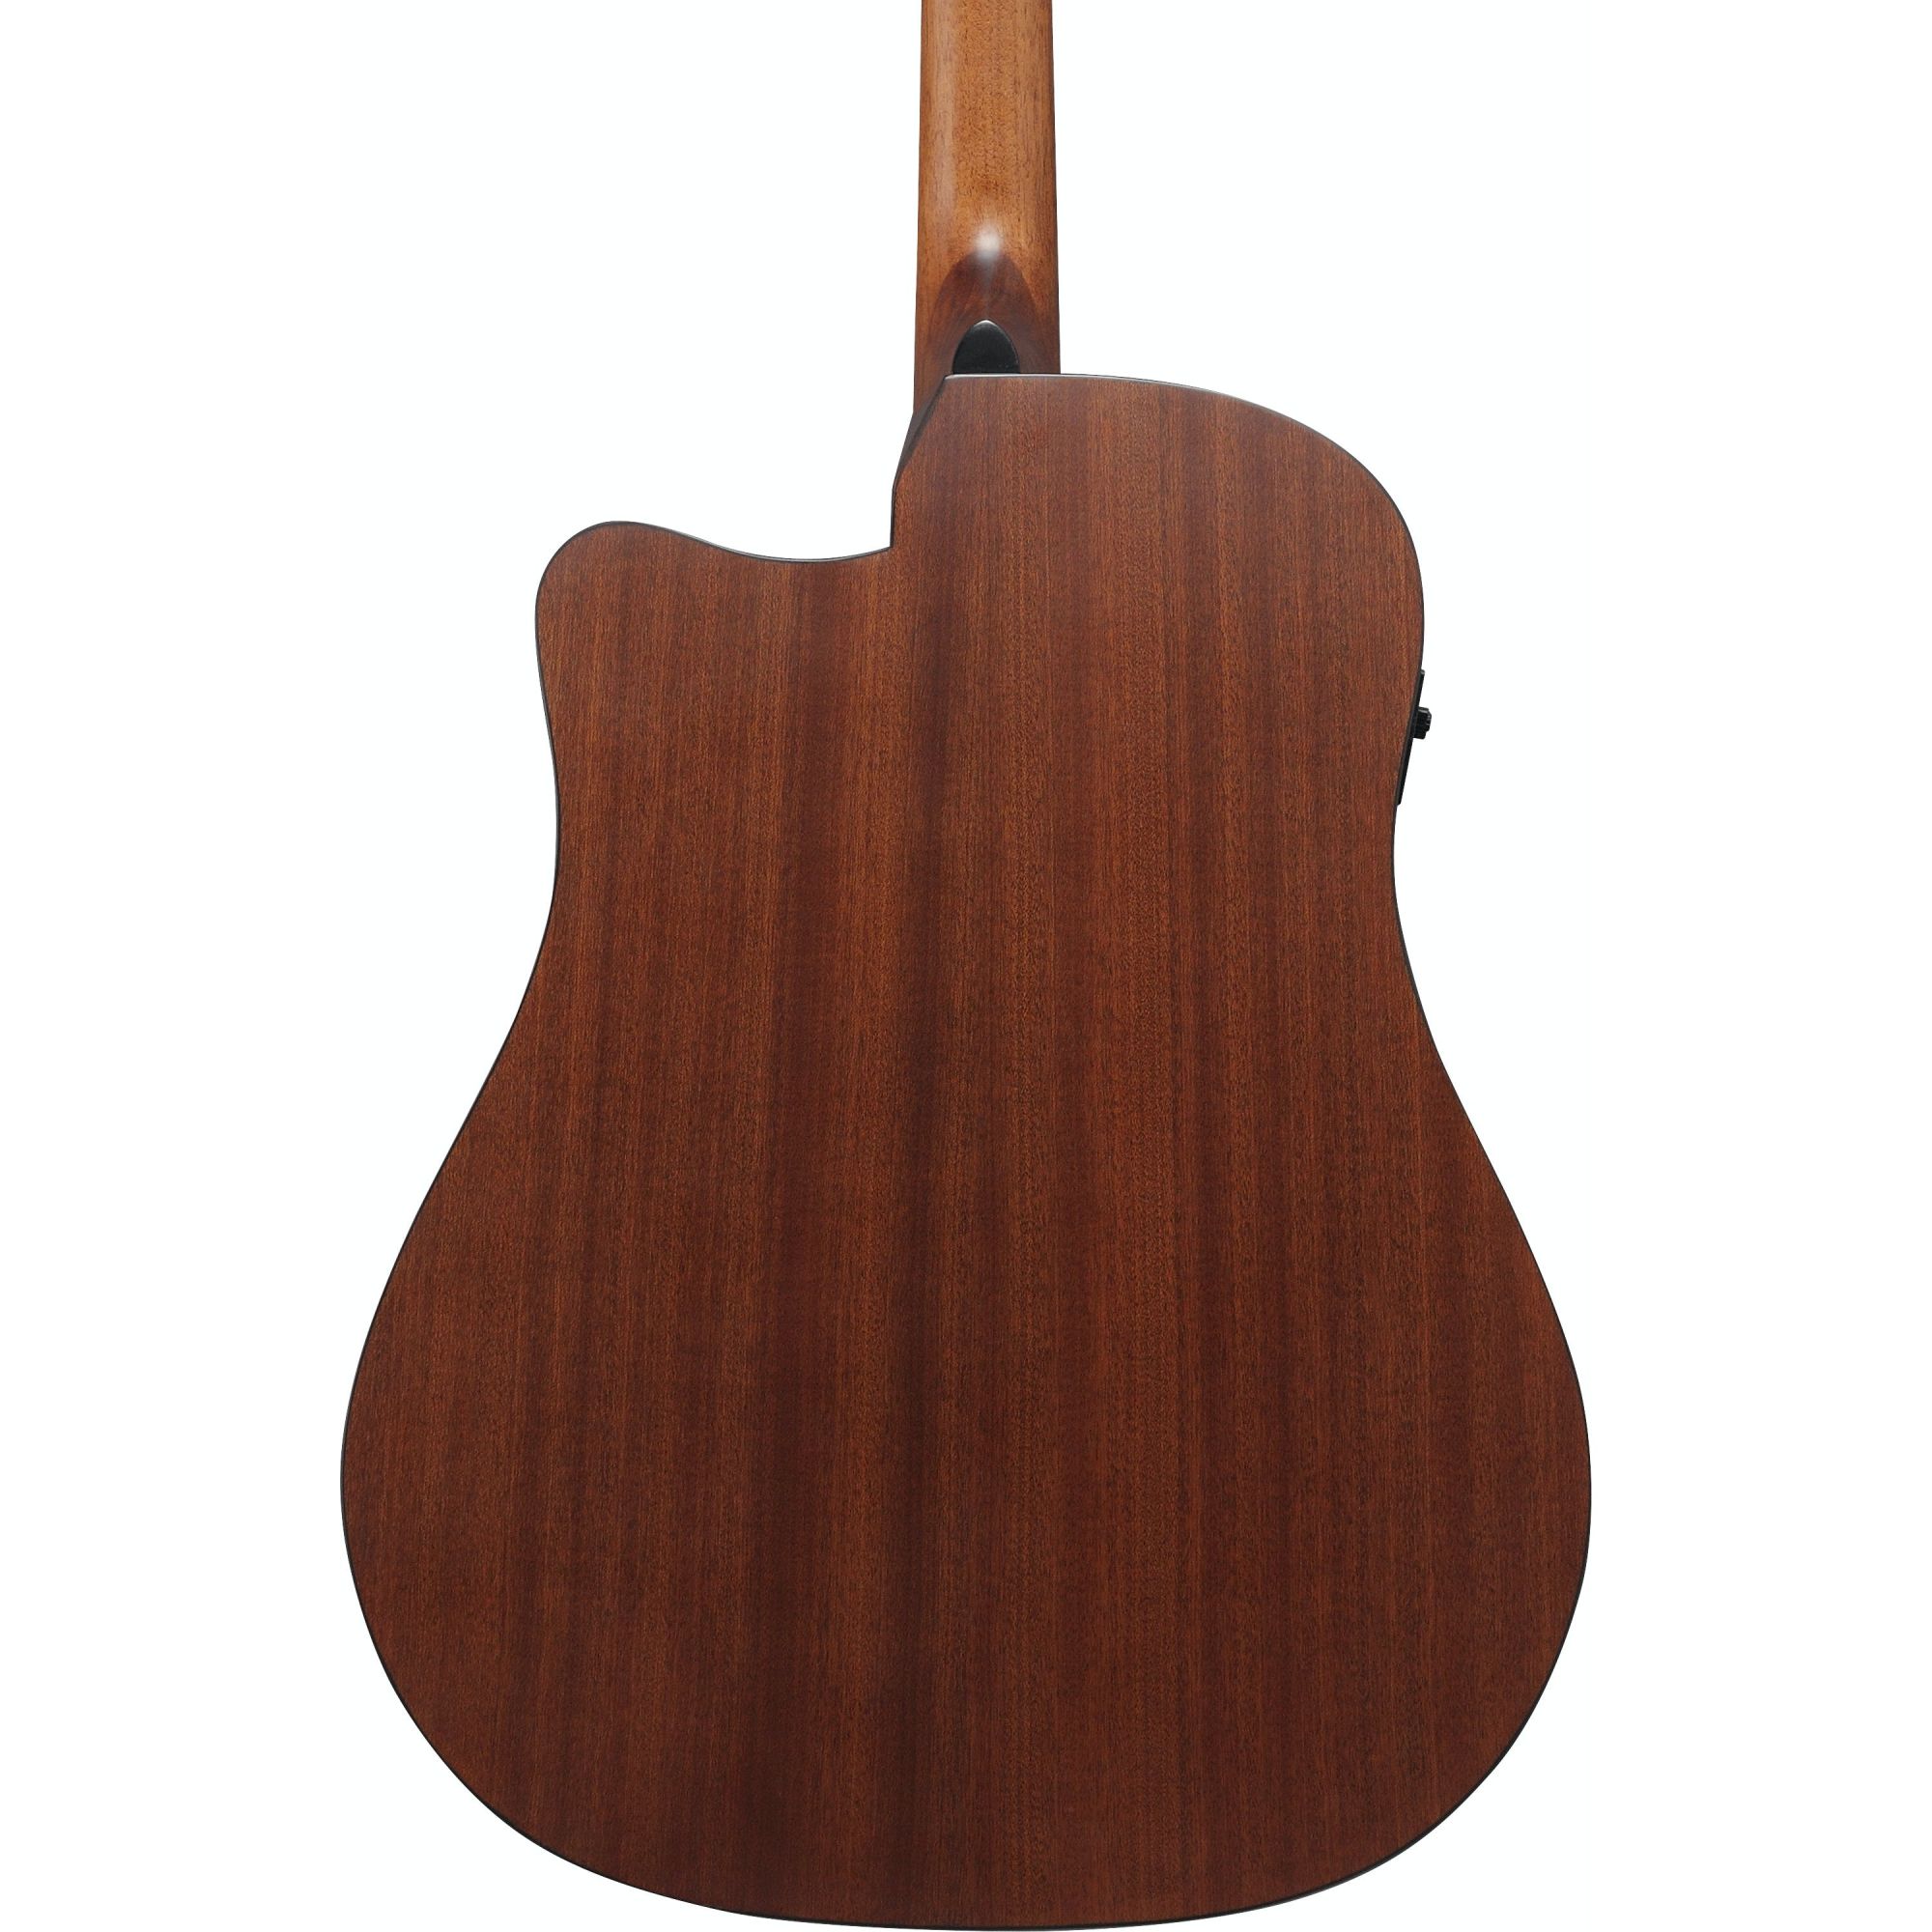 Ibanez AAD50CE Advanced Acoustic-electric Guitar - Natural Online price in India